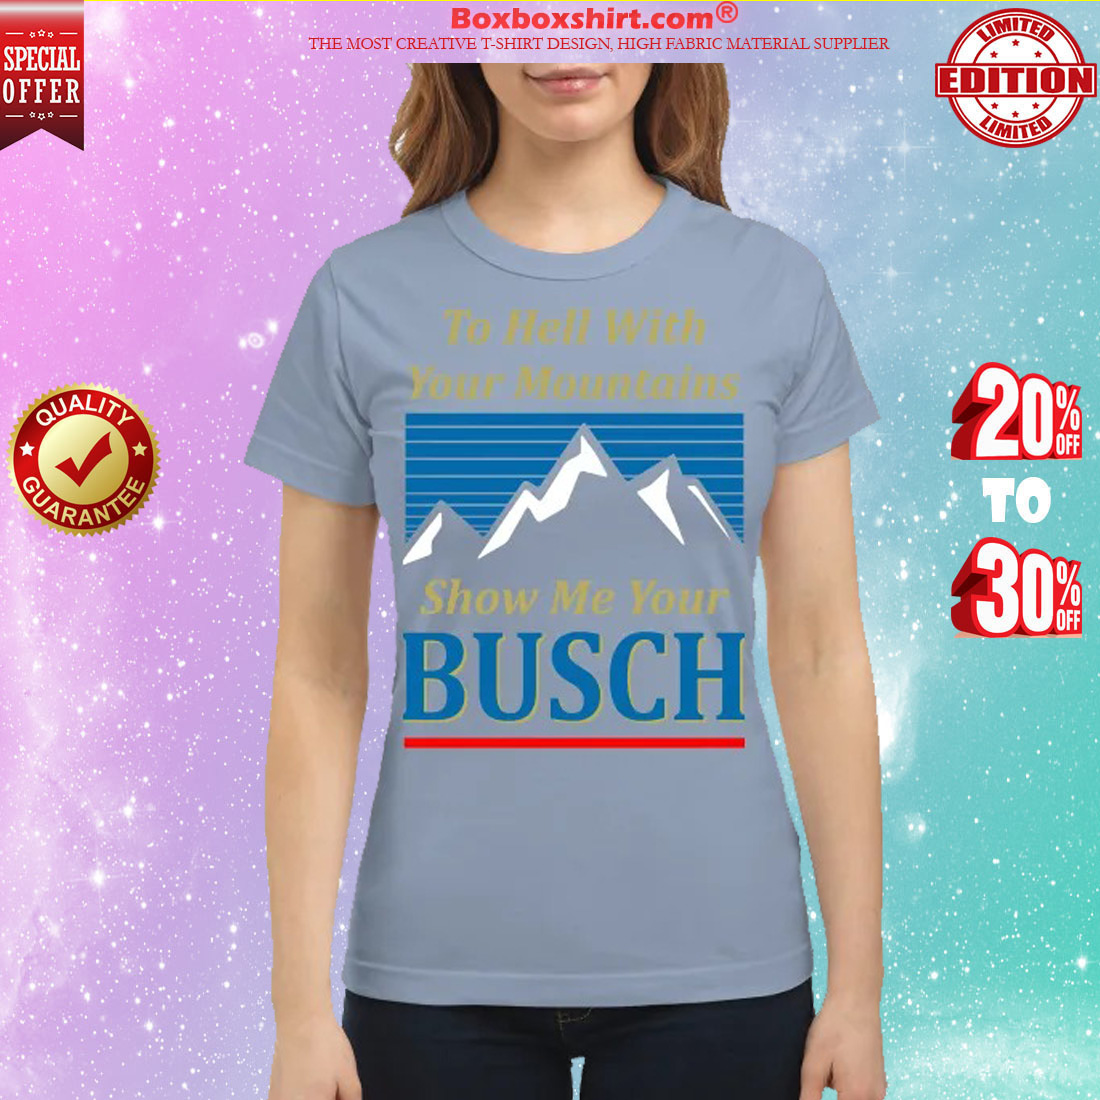 To hell with your mountains show me your buschh classic shirt